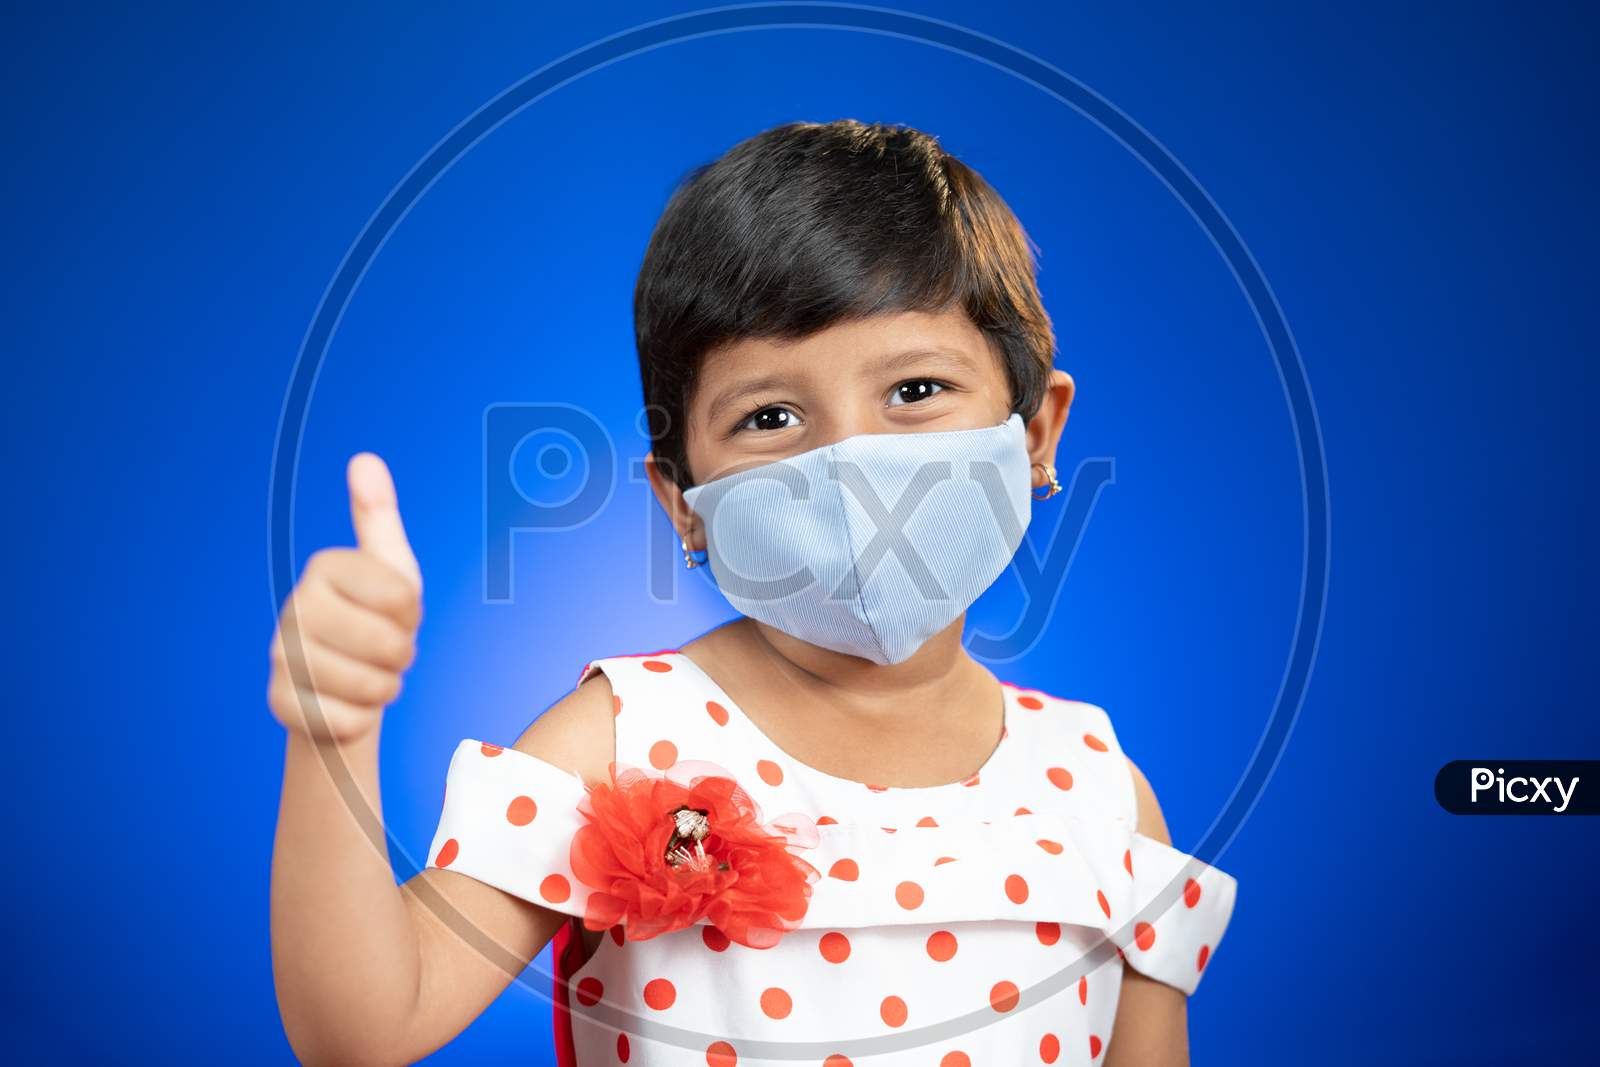 Little Girl Kid Adjusting Medical Face Mask And Showing Thumps Up Gesture - Concept Showing Of Coronavirus Covid-19 Saferty Measures By Wearing Mask As New Normal